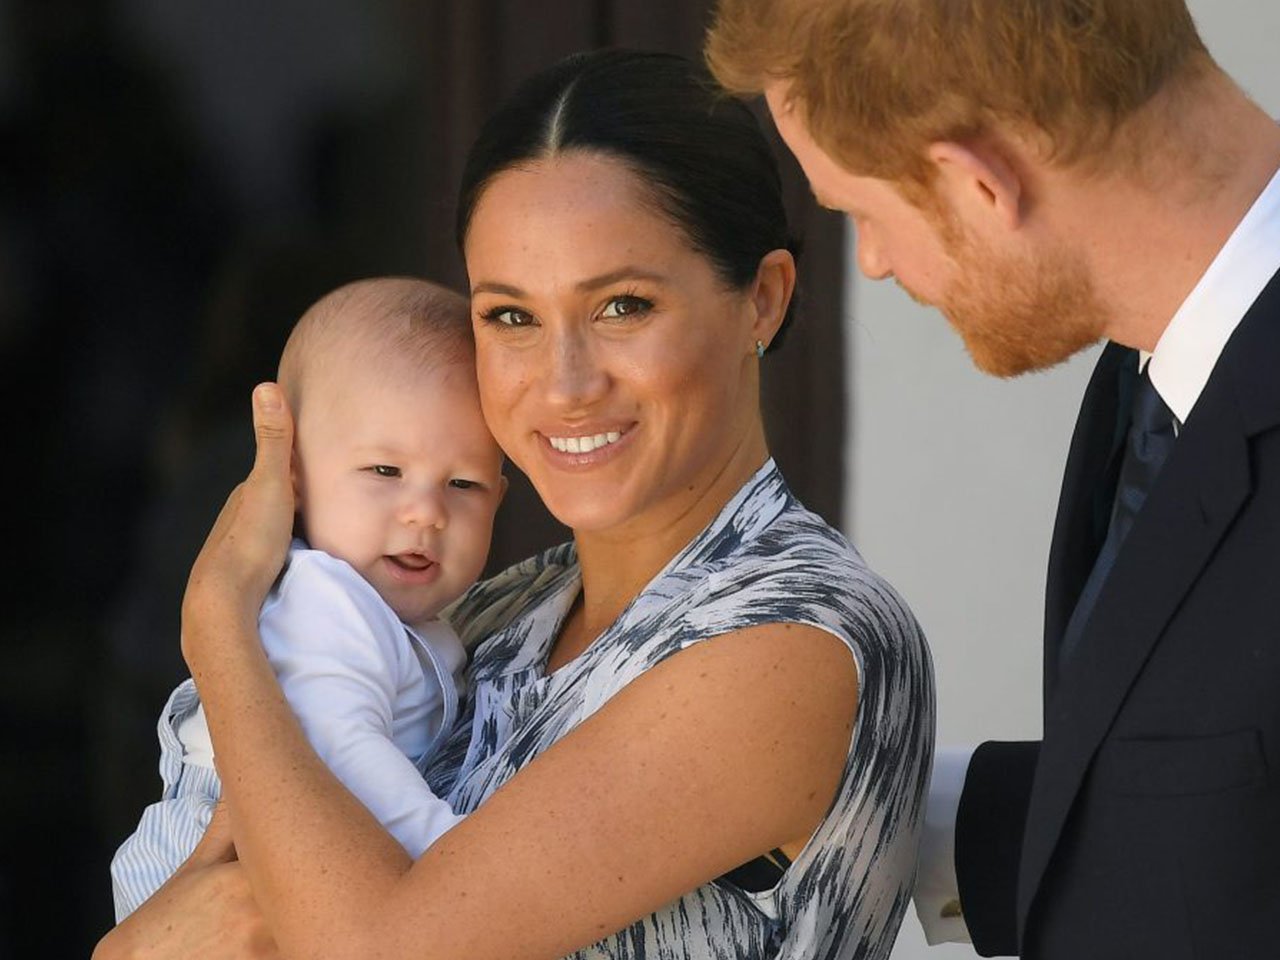 Meghan Markle’s first children’s book was inspired by Prince Harry and Archie